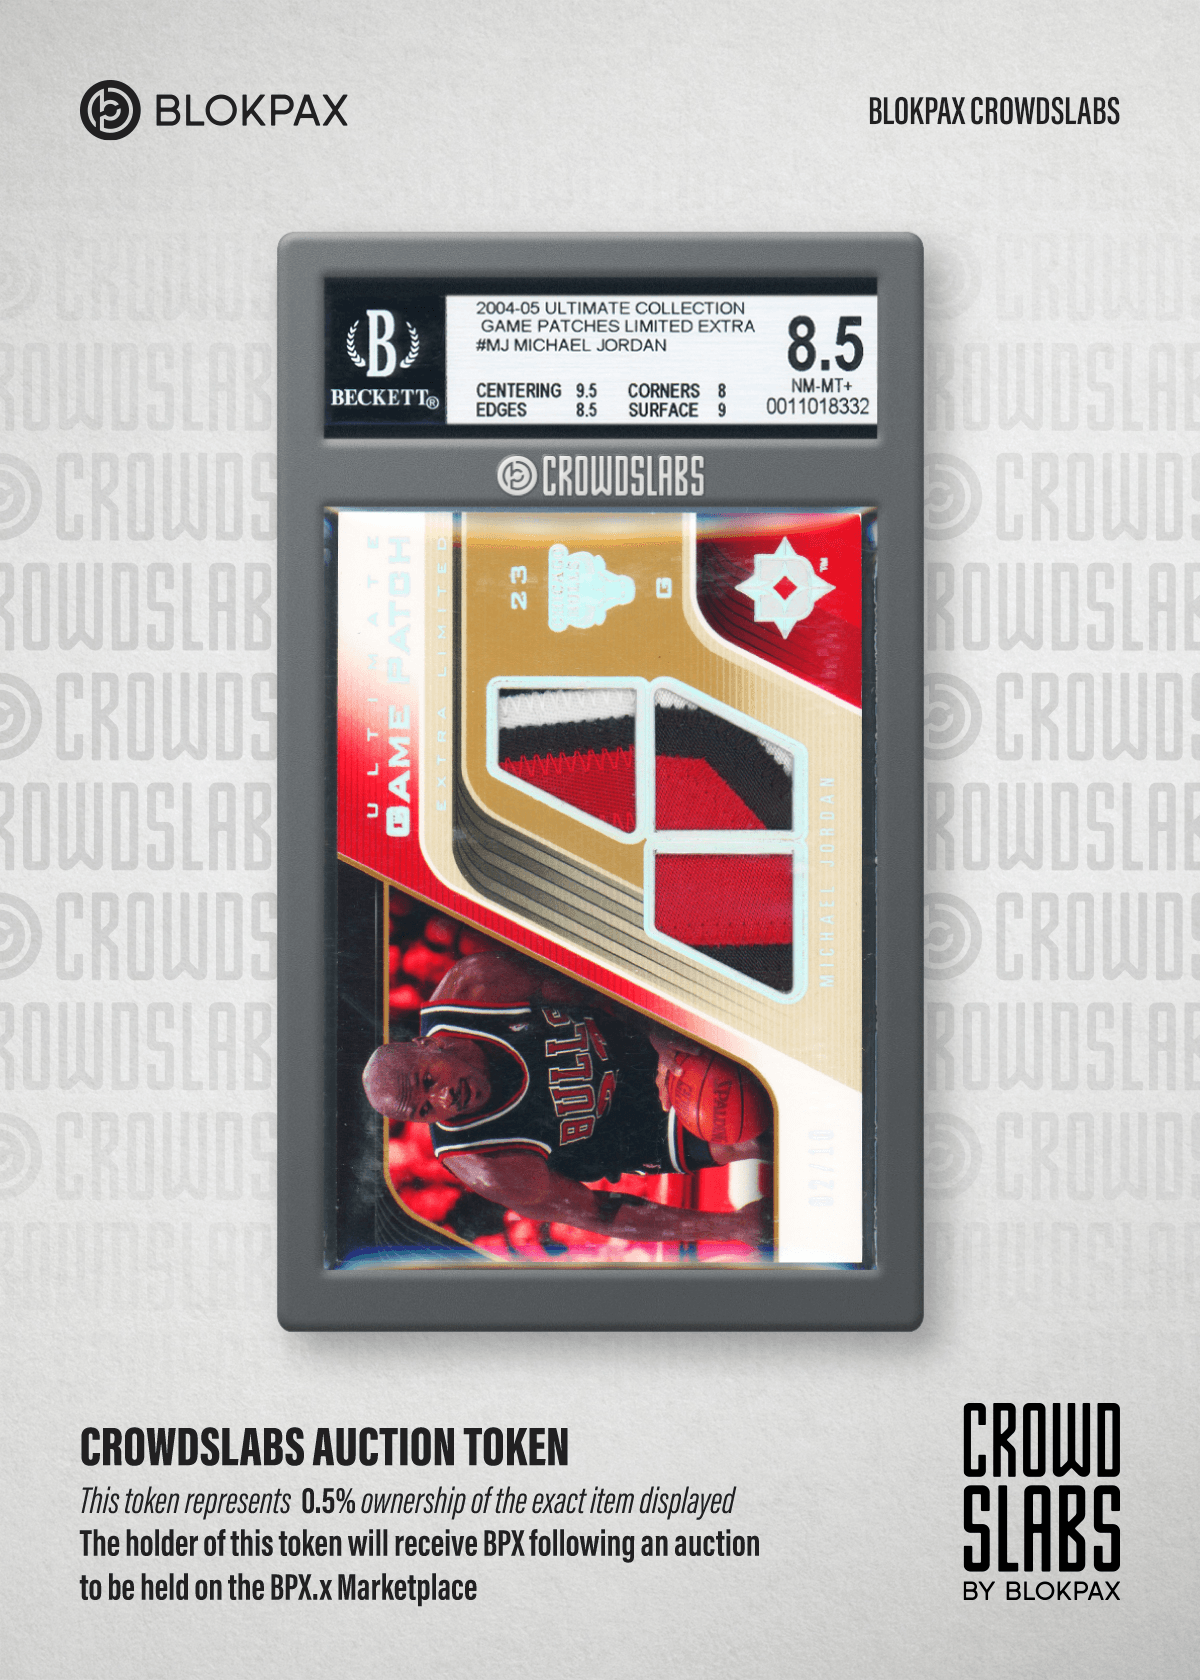 2004-05 Ultimate Collection Michael Jordan Game Patches Limited Extra #MJ BGS 8.5